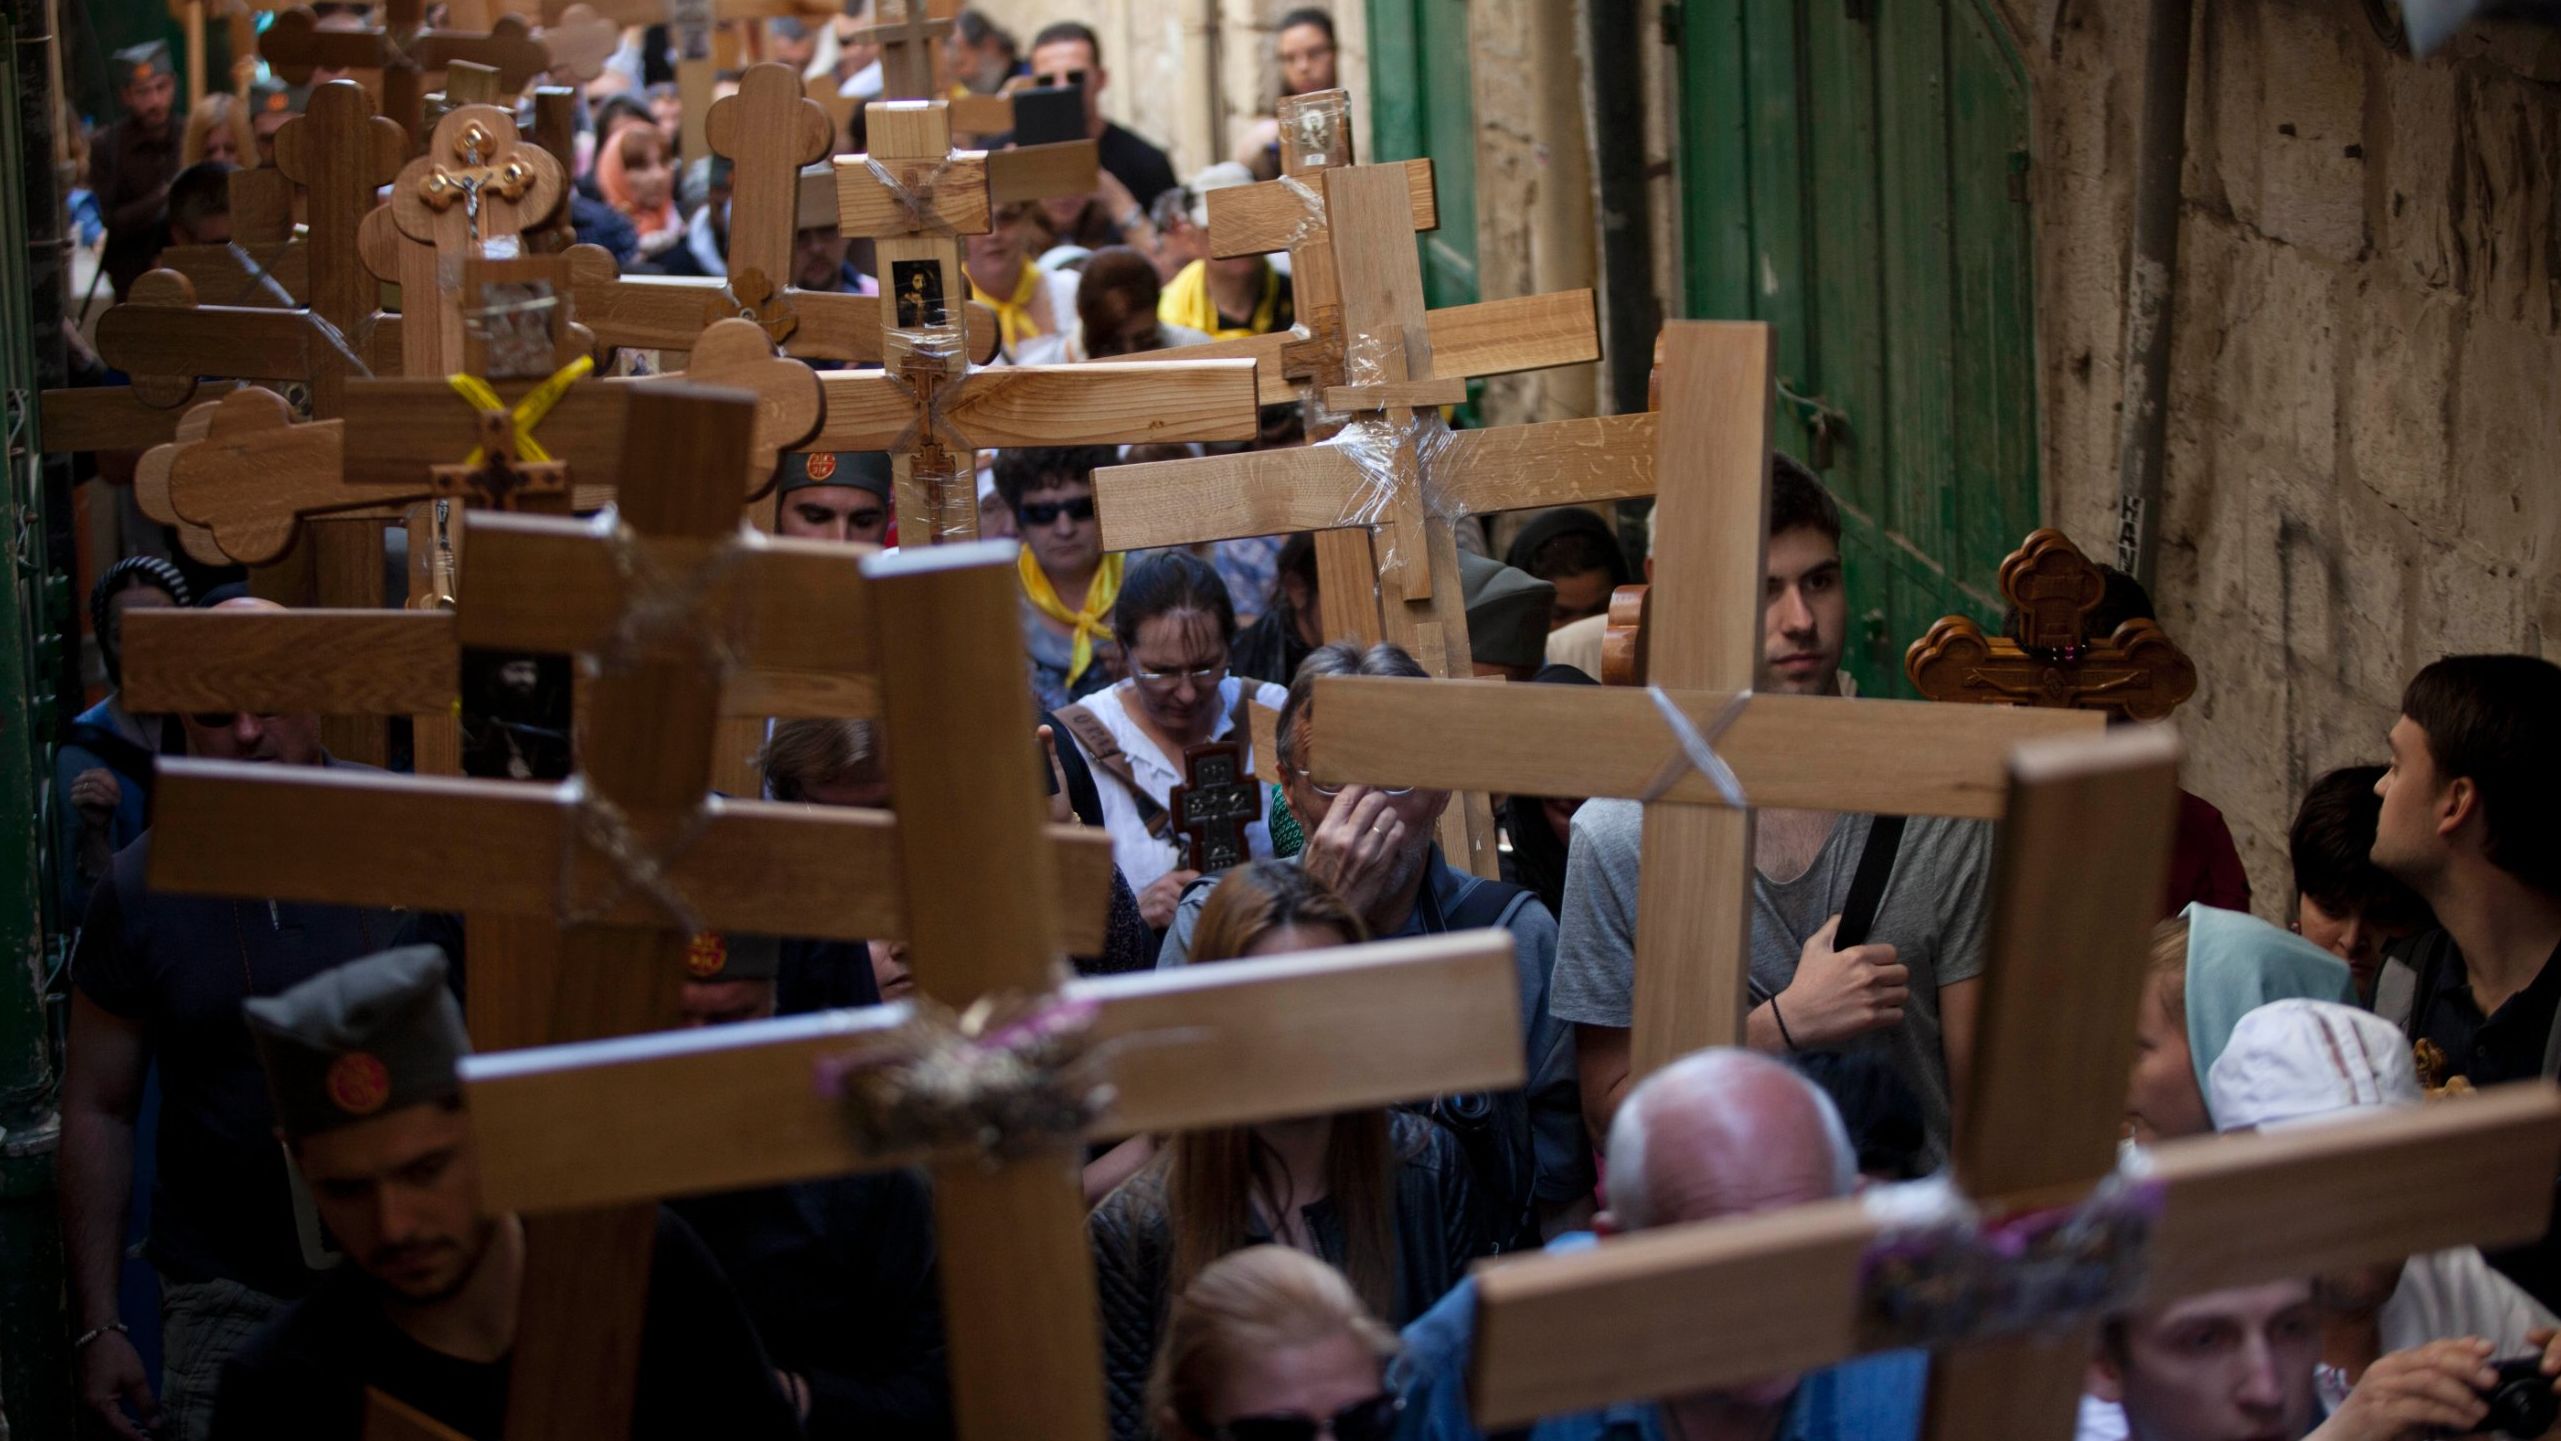 Orthodox Christian pilgrims hold wooden crosses as they take part in the Good Friday procession along the Via Dolorosa in Jerusalem.